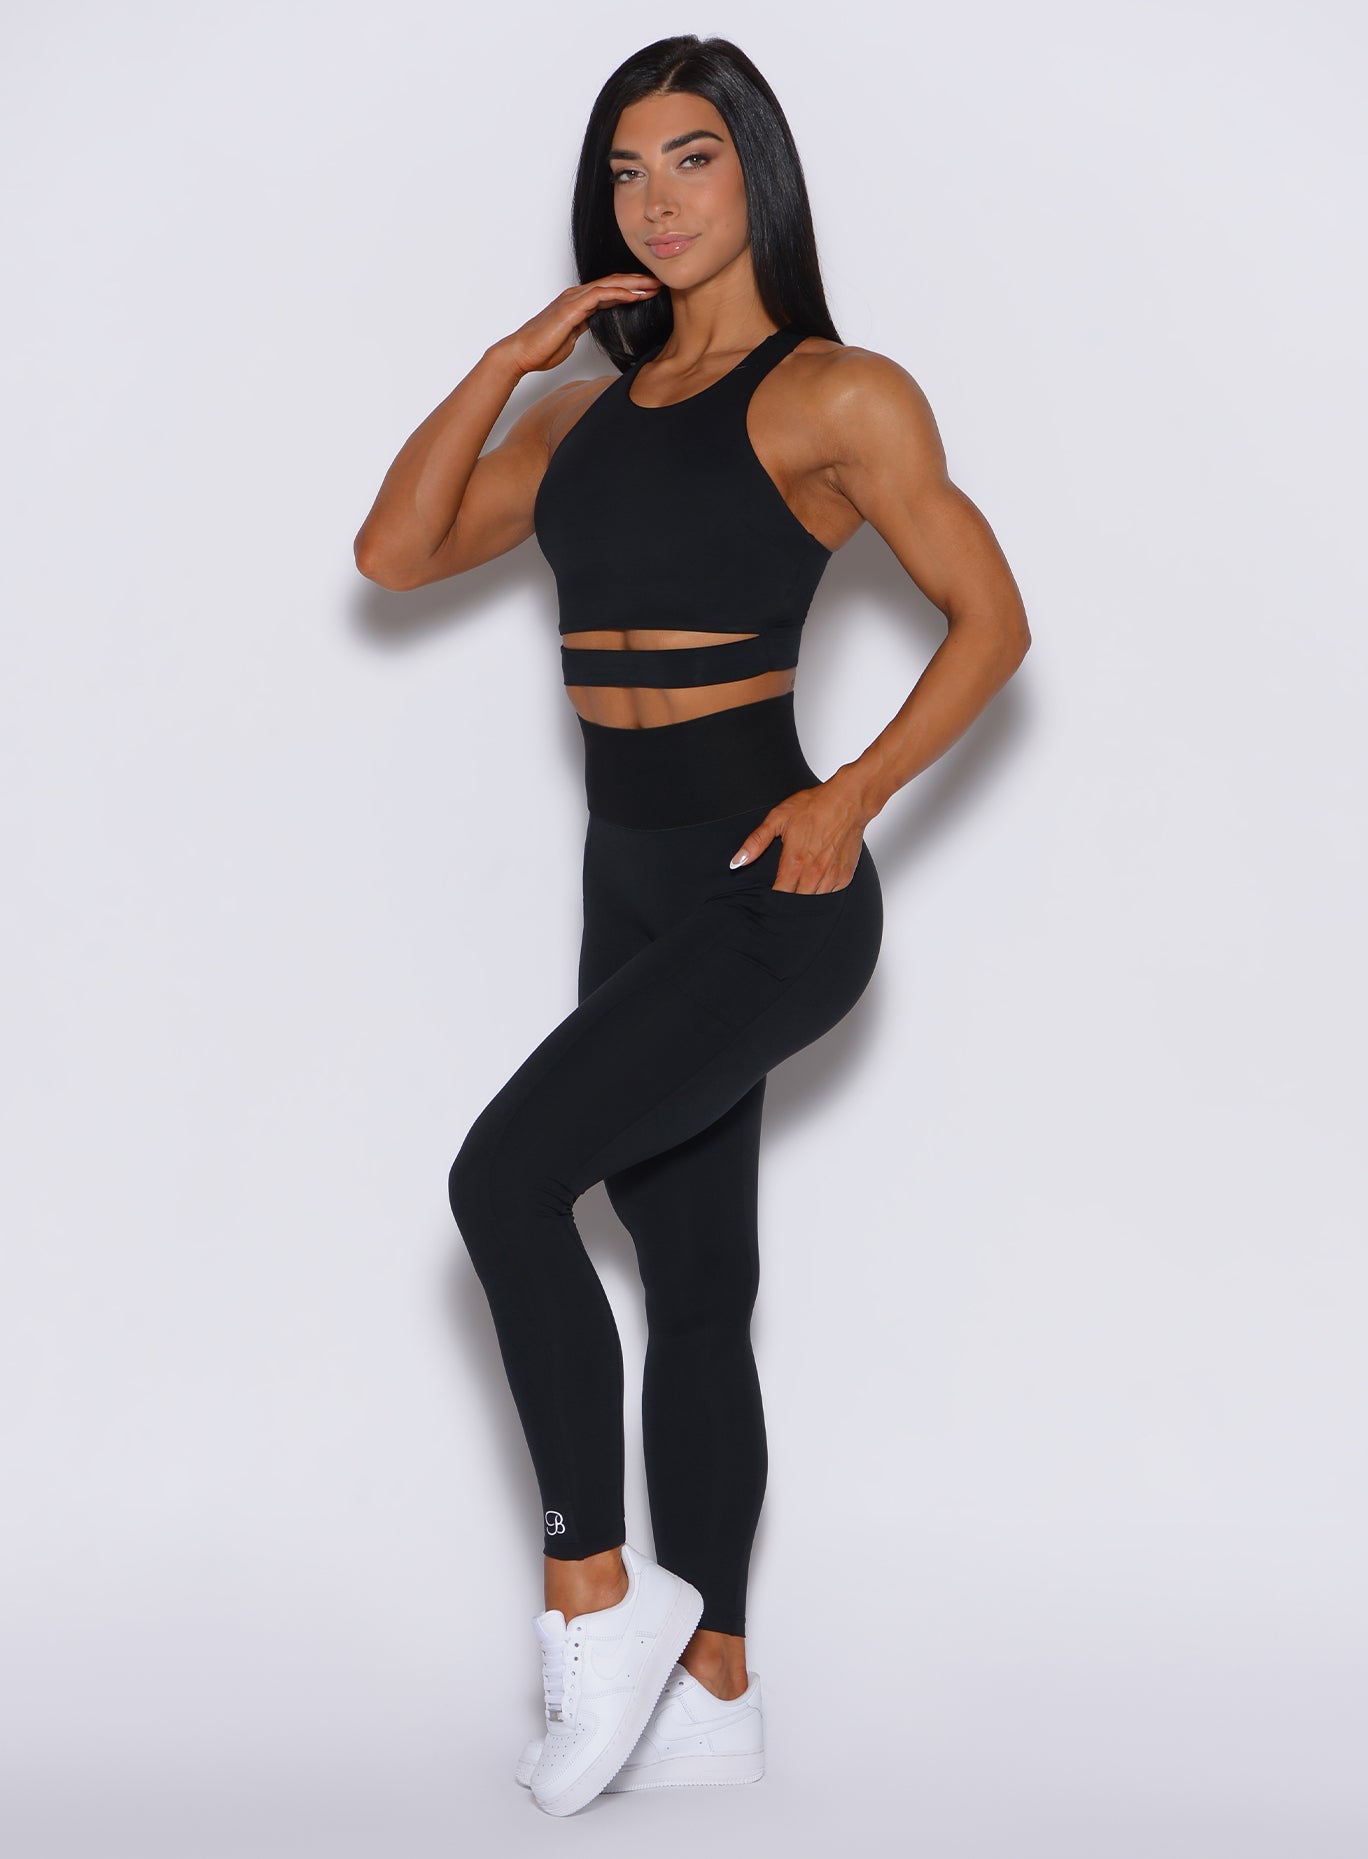 Left side profile view of a model in our black cincher leggings and a matching top